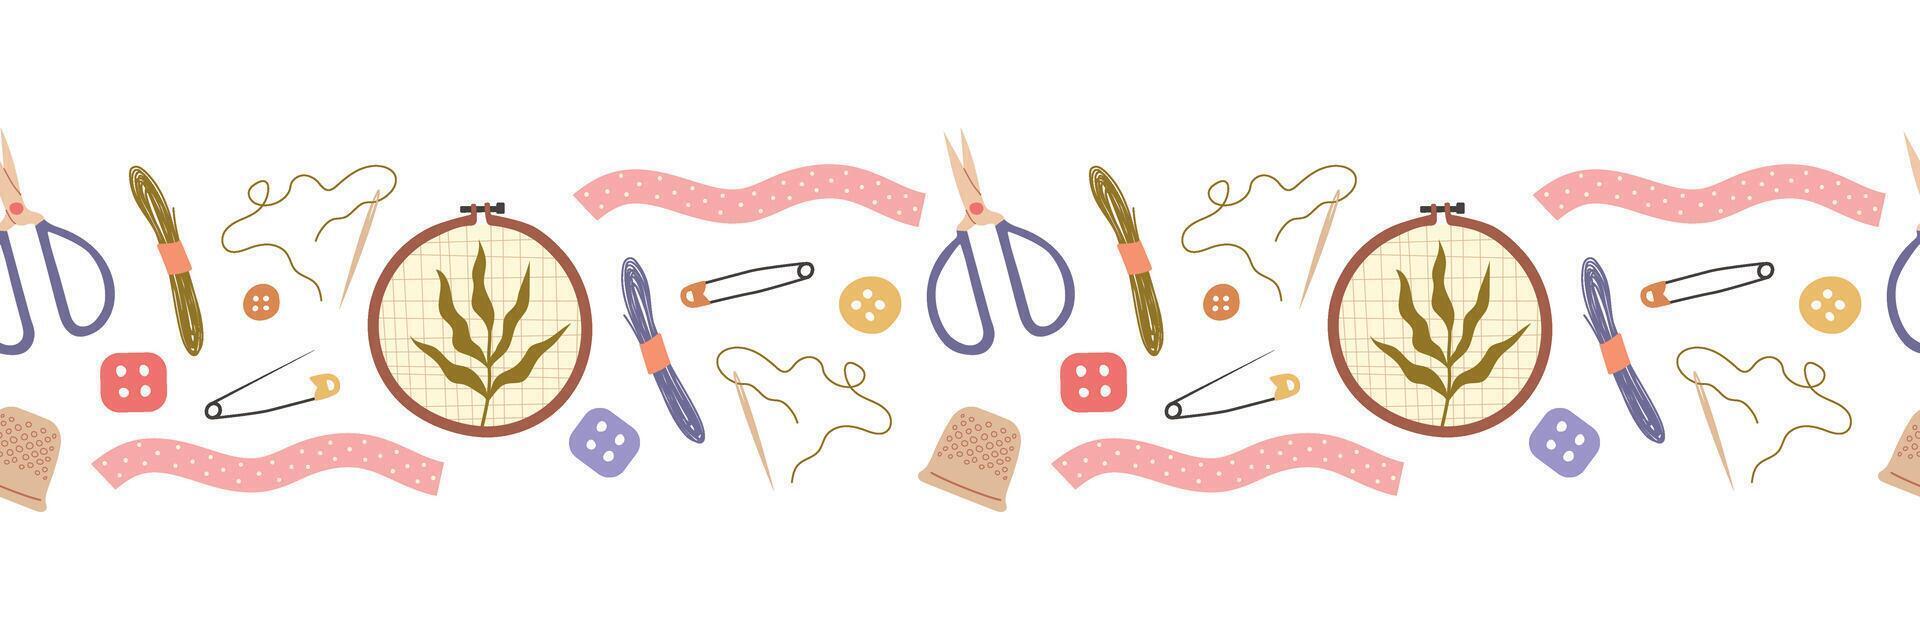 Embroidery seamless pattern. Hoop, floss, scissors, needles. illustration for your design vector